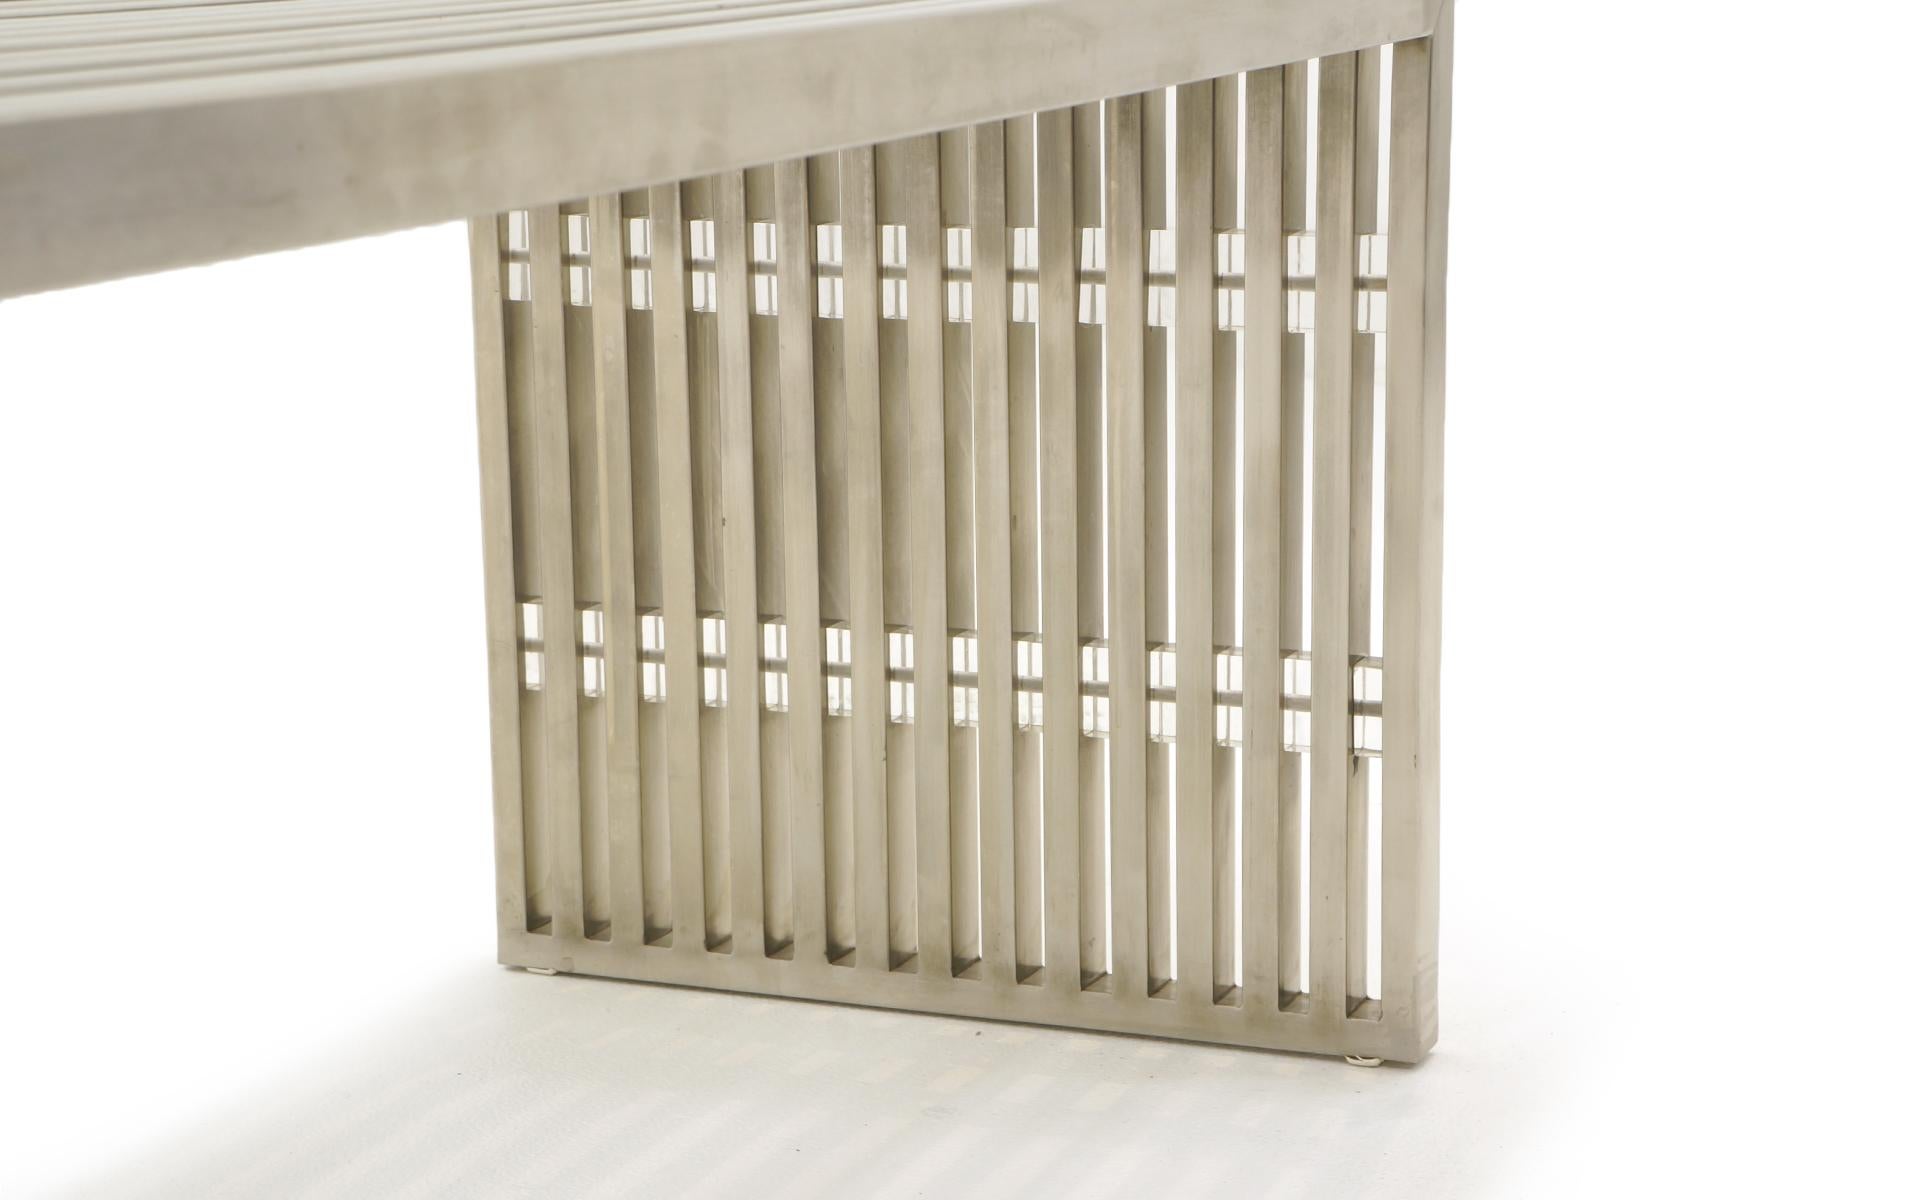 American Chrome and Lucite Slat Bench Attributed to Milo Baughman